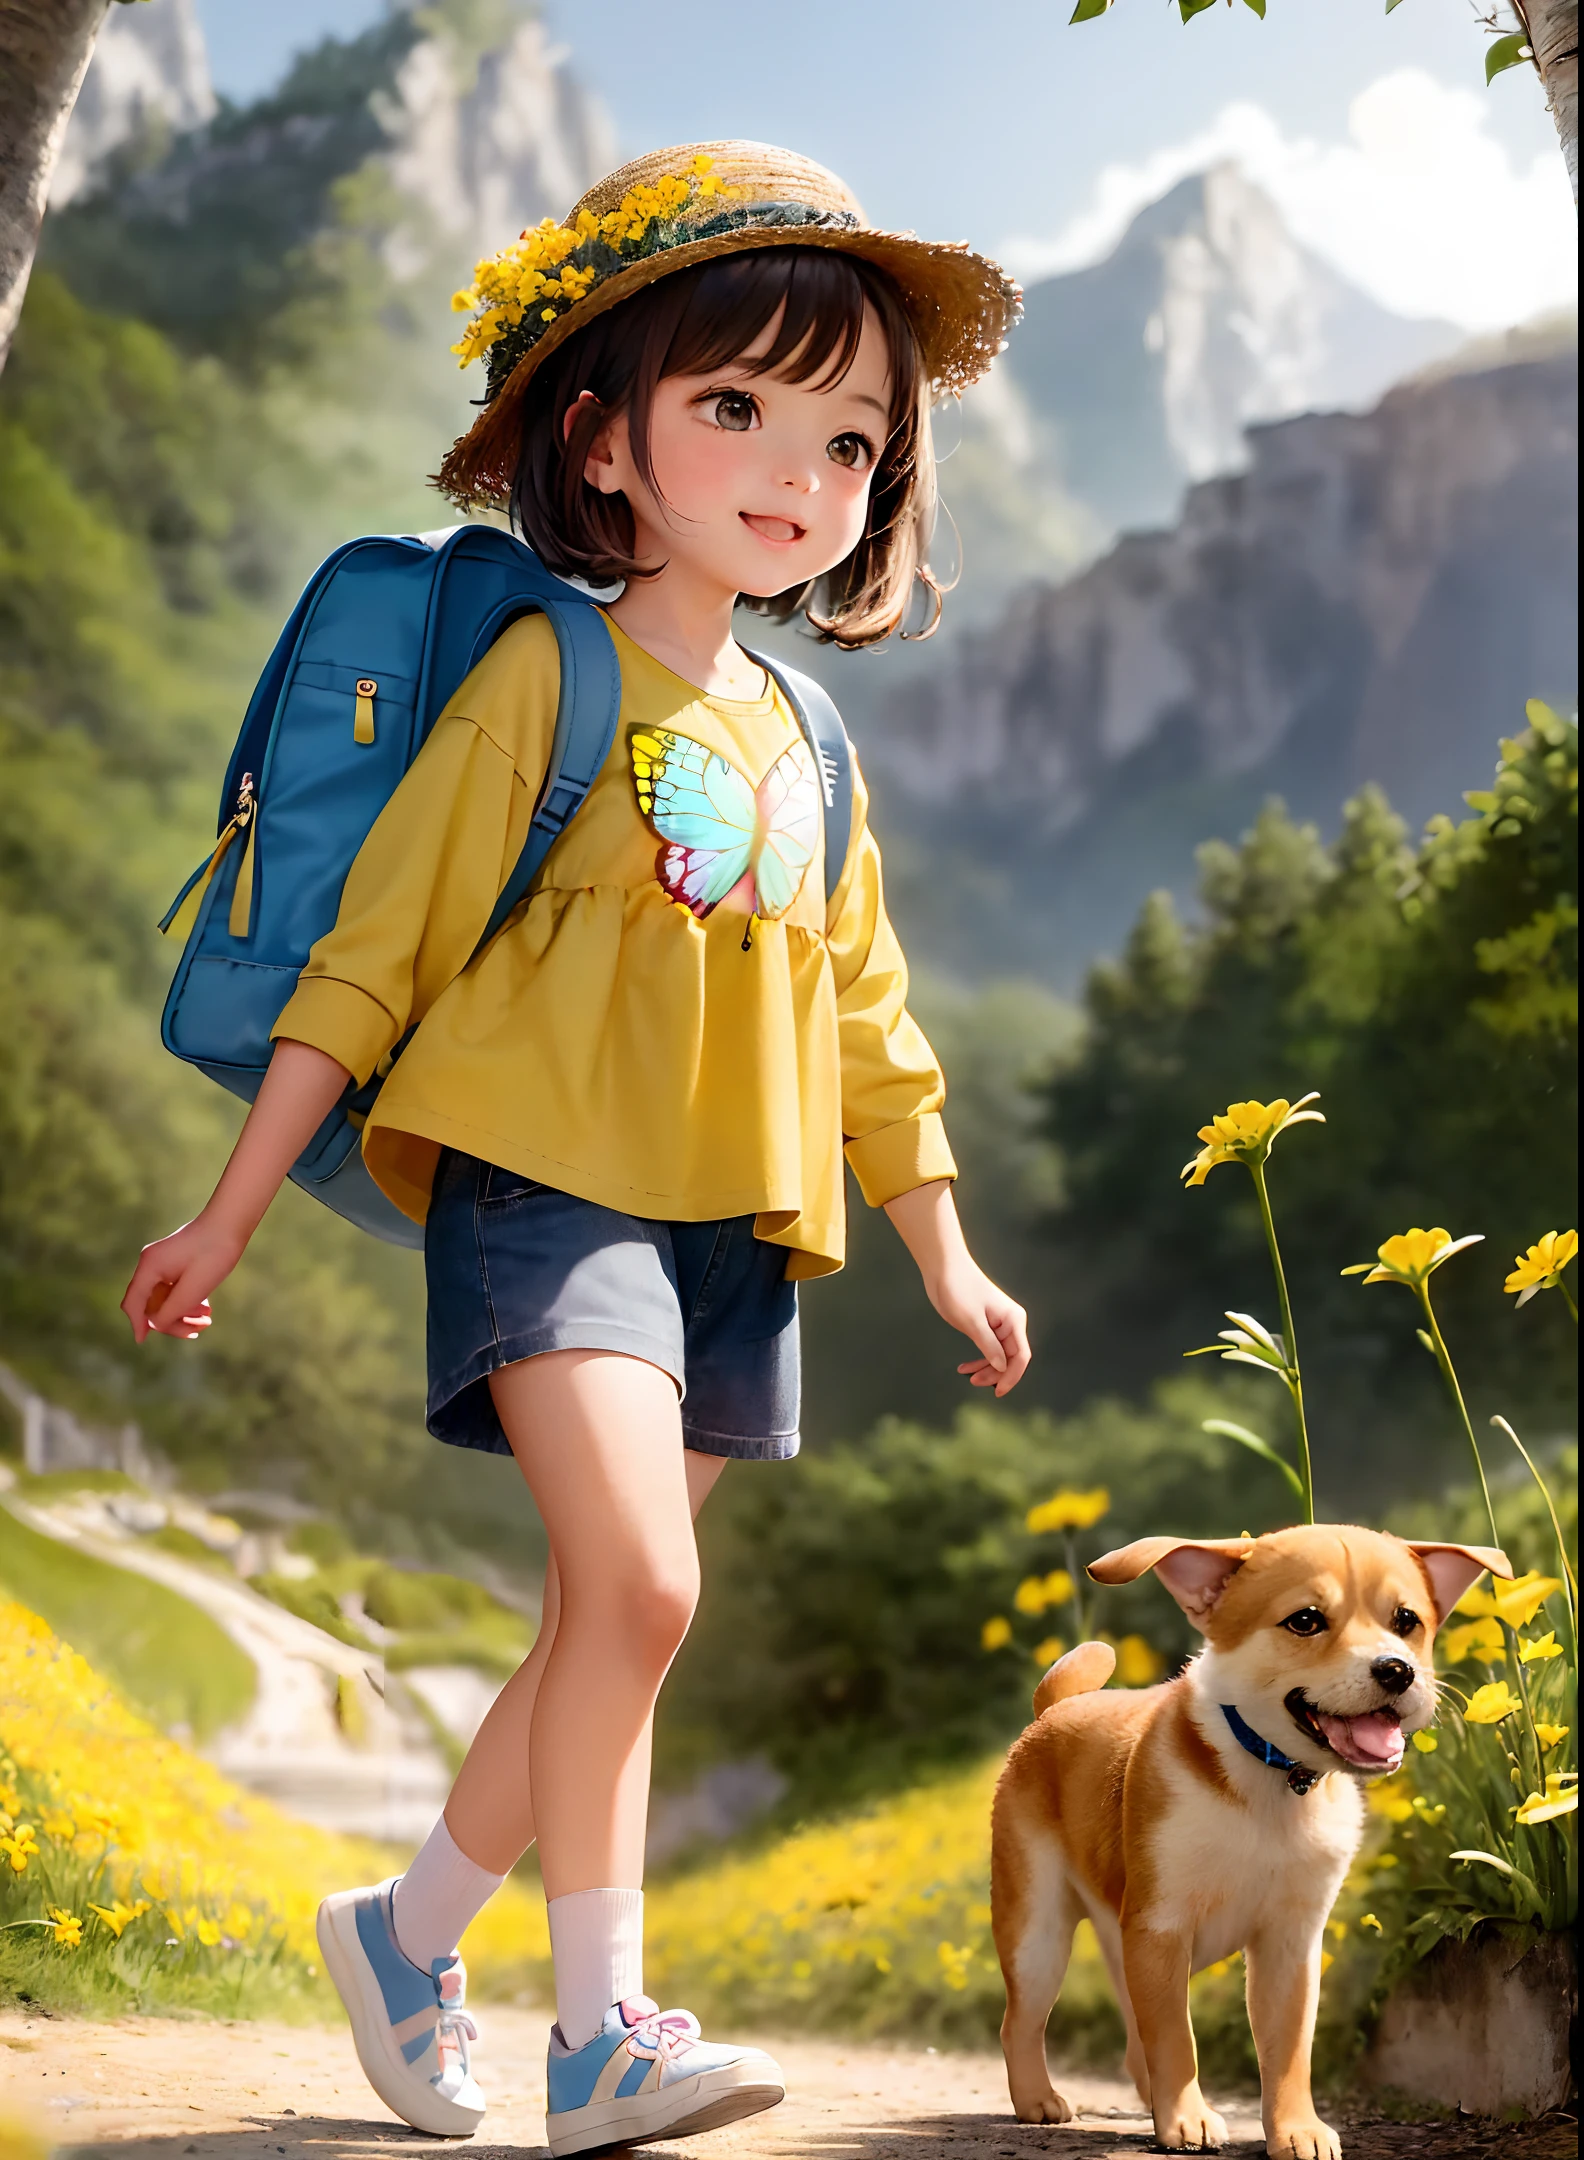 An incredibly charming  carrying a backpack, accompanied by her adorable puppy, enjoying a lovely spring outing surrounded by beautiful yellow flowers and natural scenery. The illustration is in high definition at 4k resolution, with highly-detailed facial features and cartoon-style visuals, (Butterfly Dance)